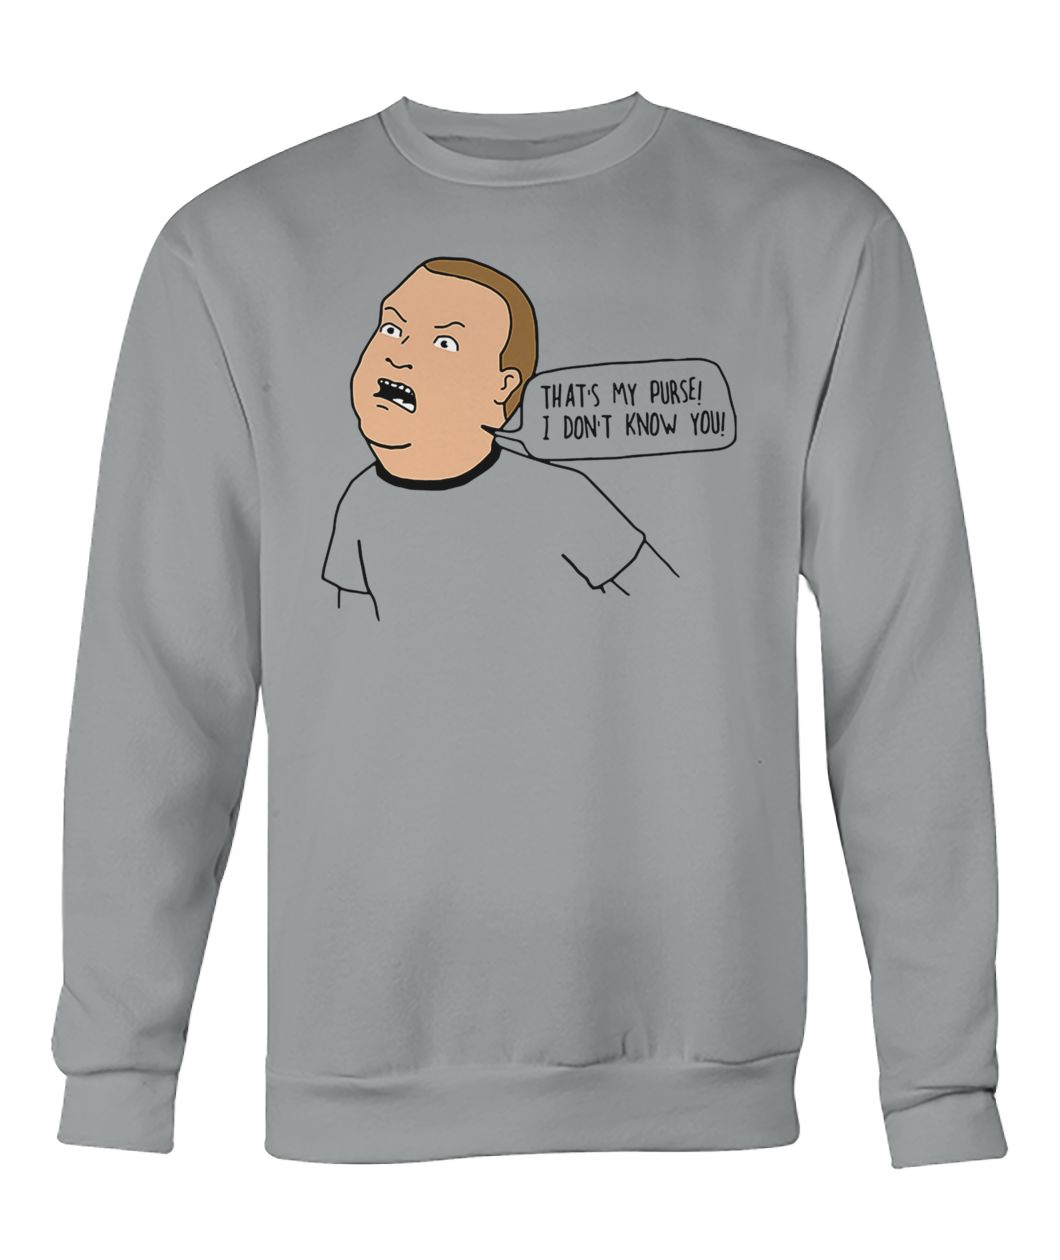 Bobby king of the hill that's my purse I dont know you crew neck sweatshirt